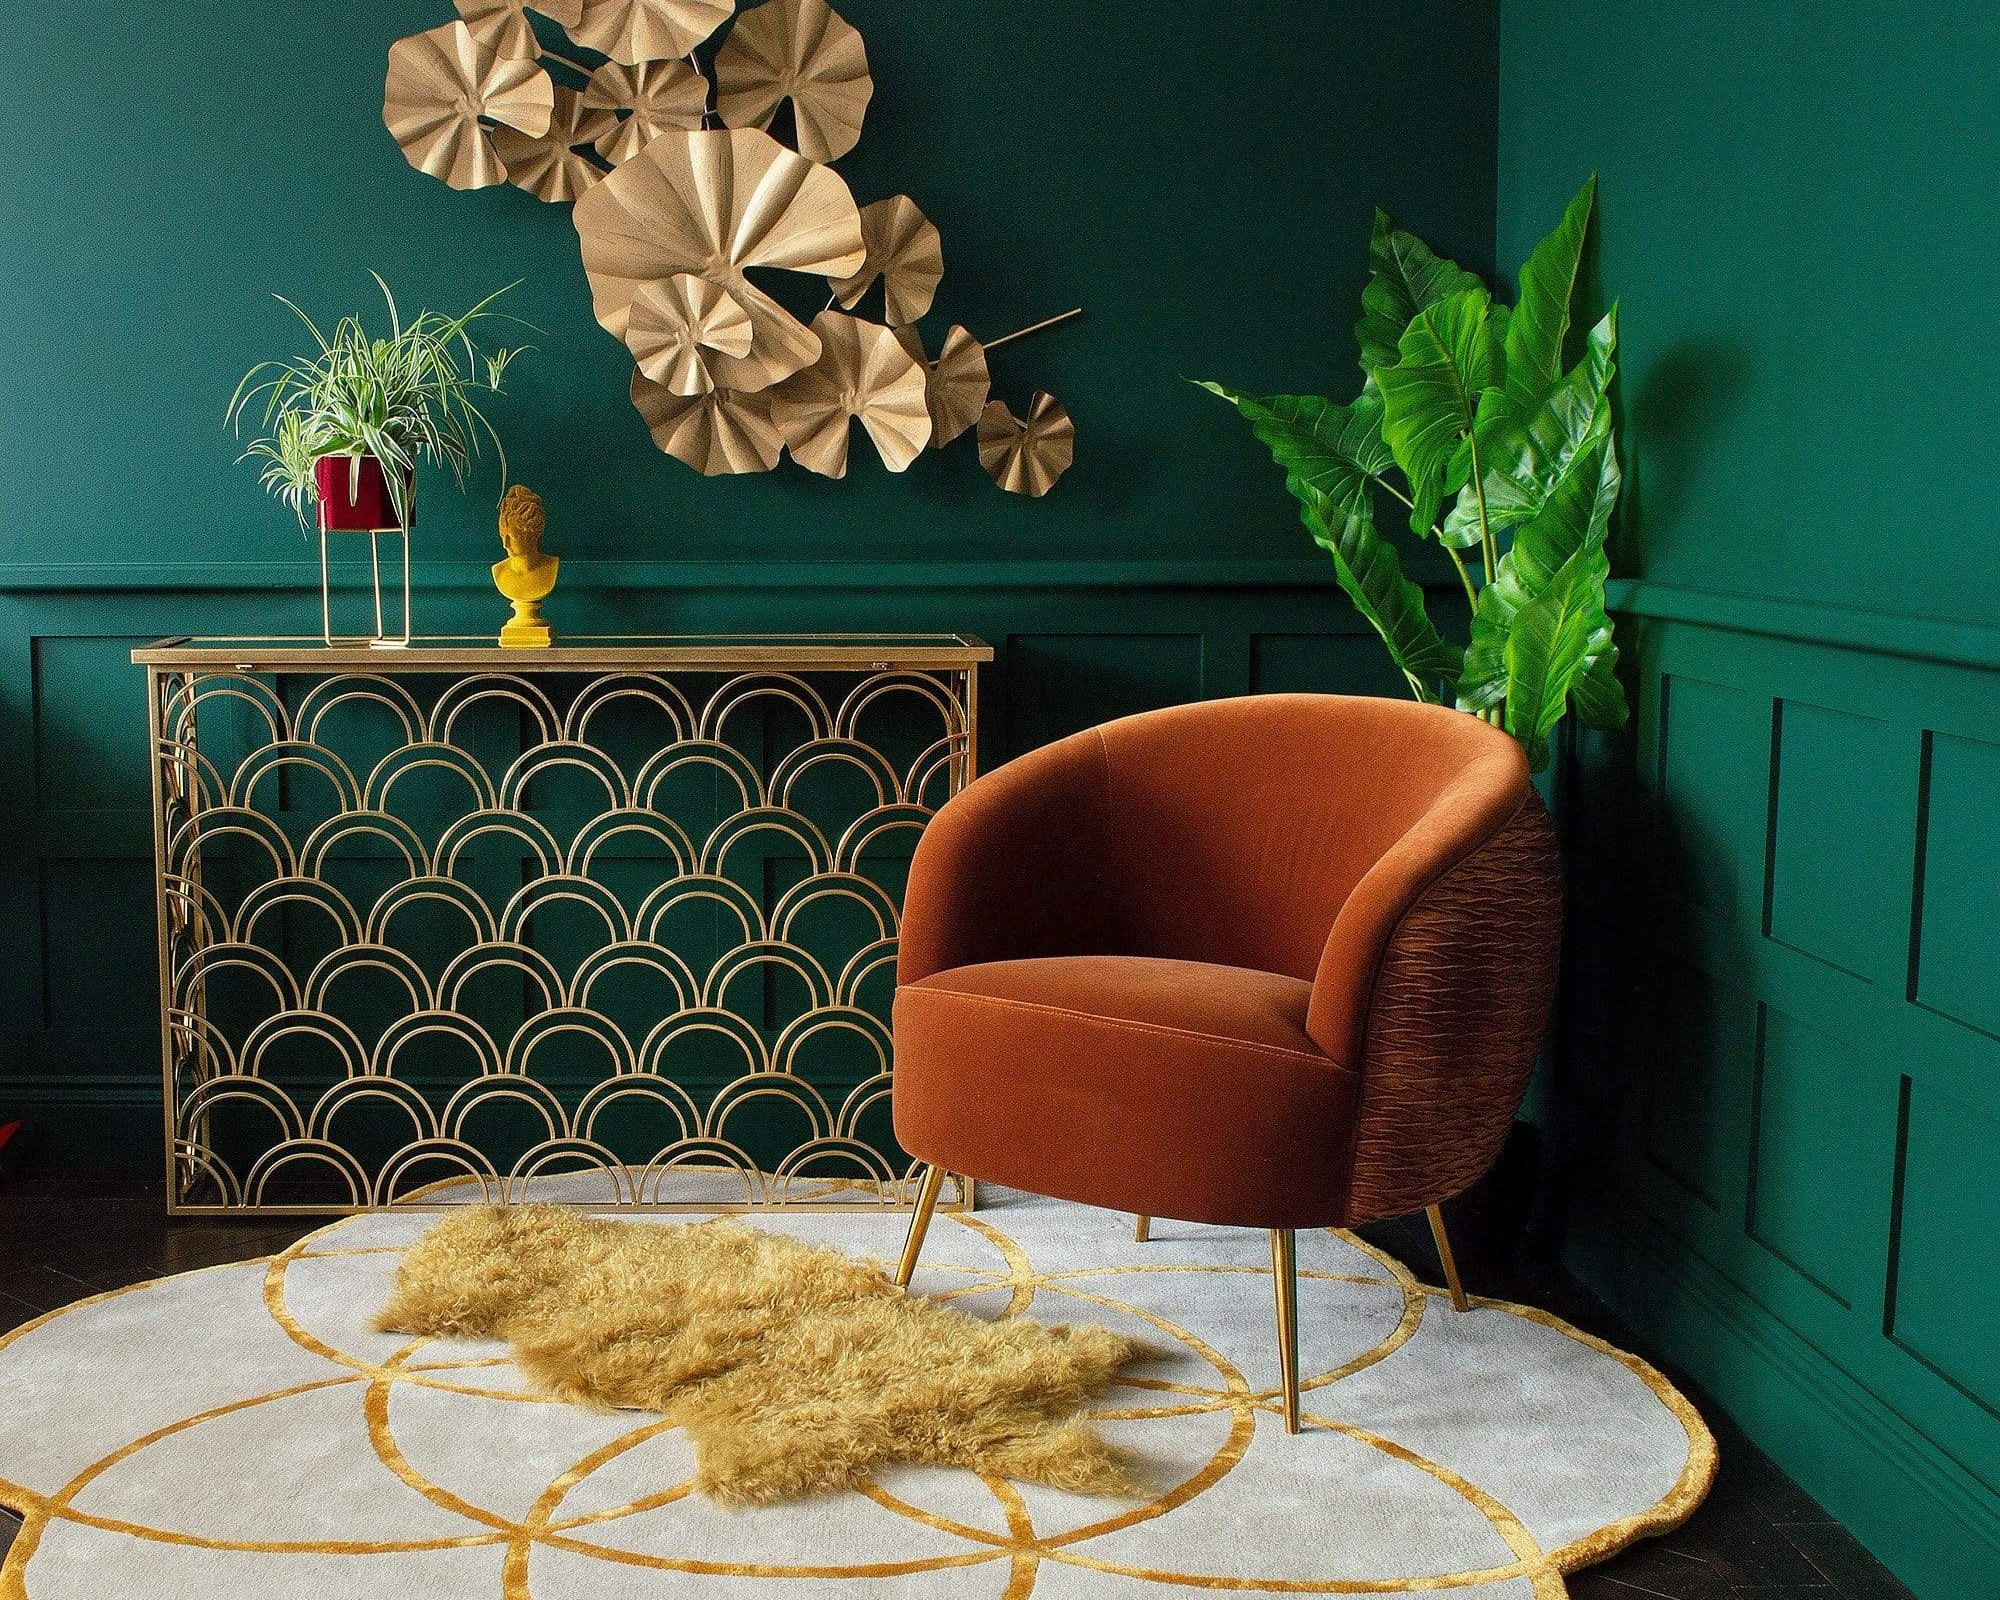 An orange armchair next to a gold console table with plant pots and a rug